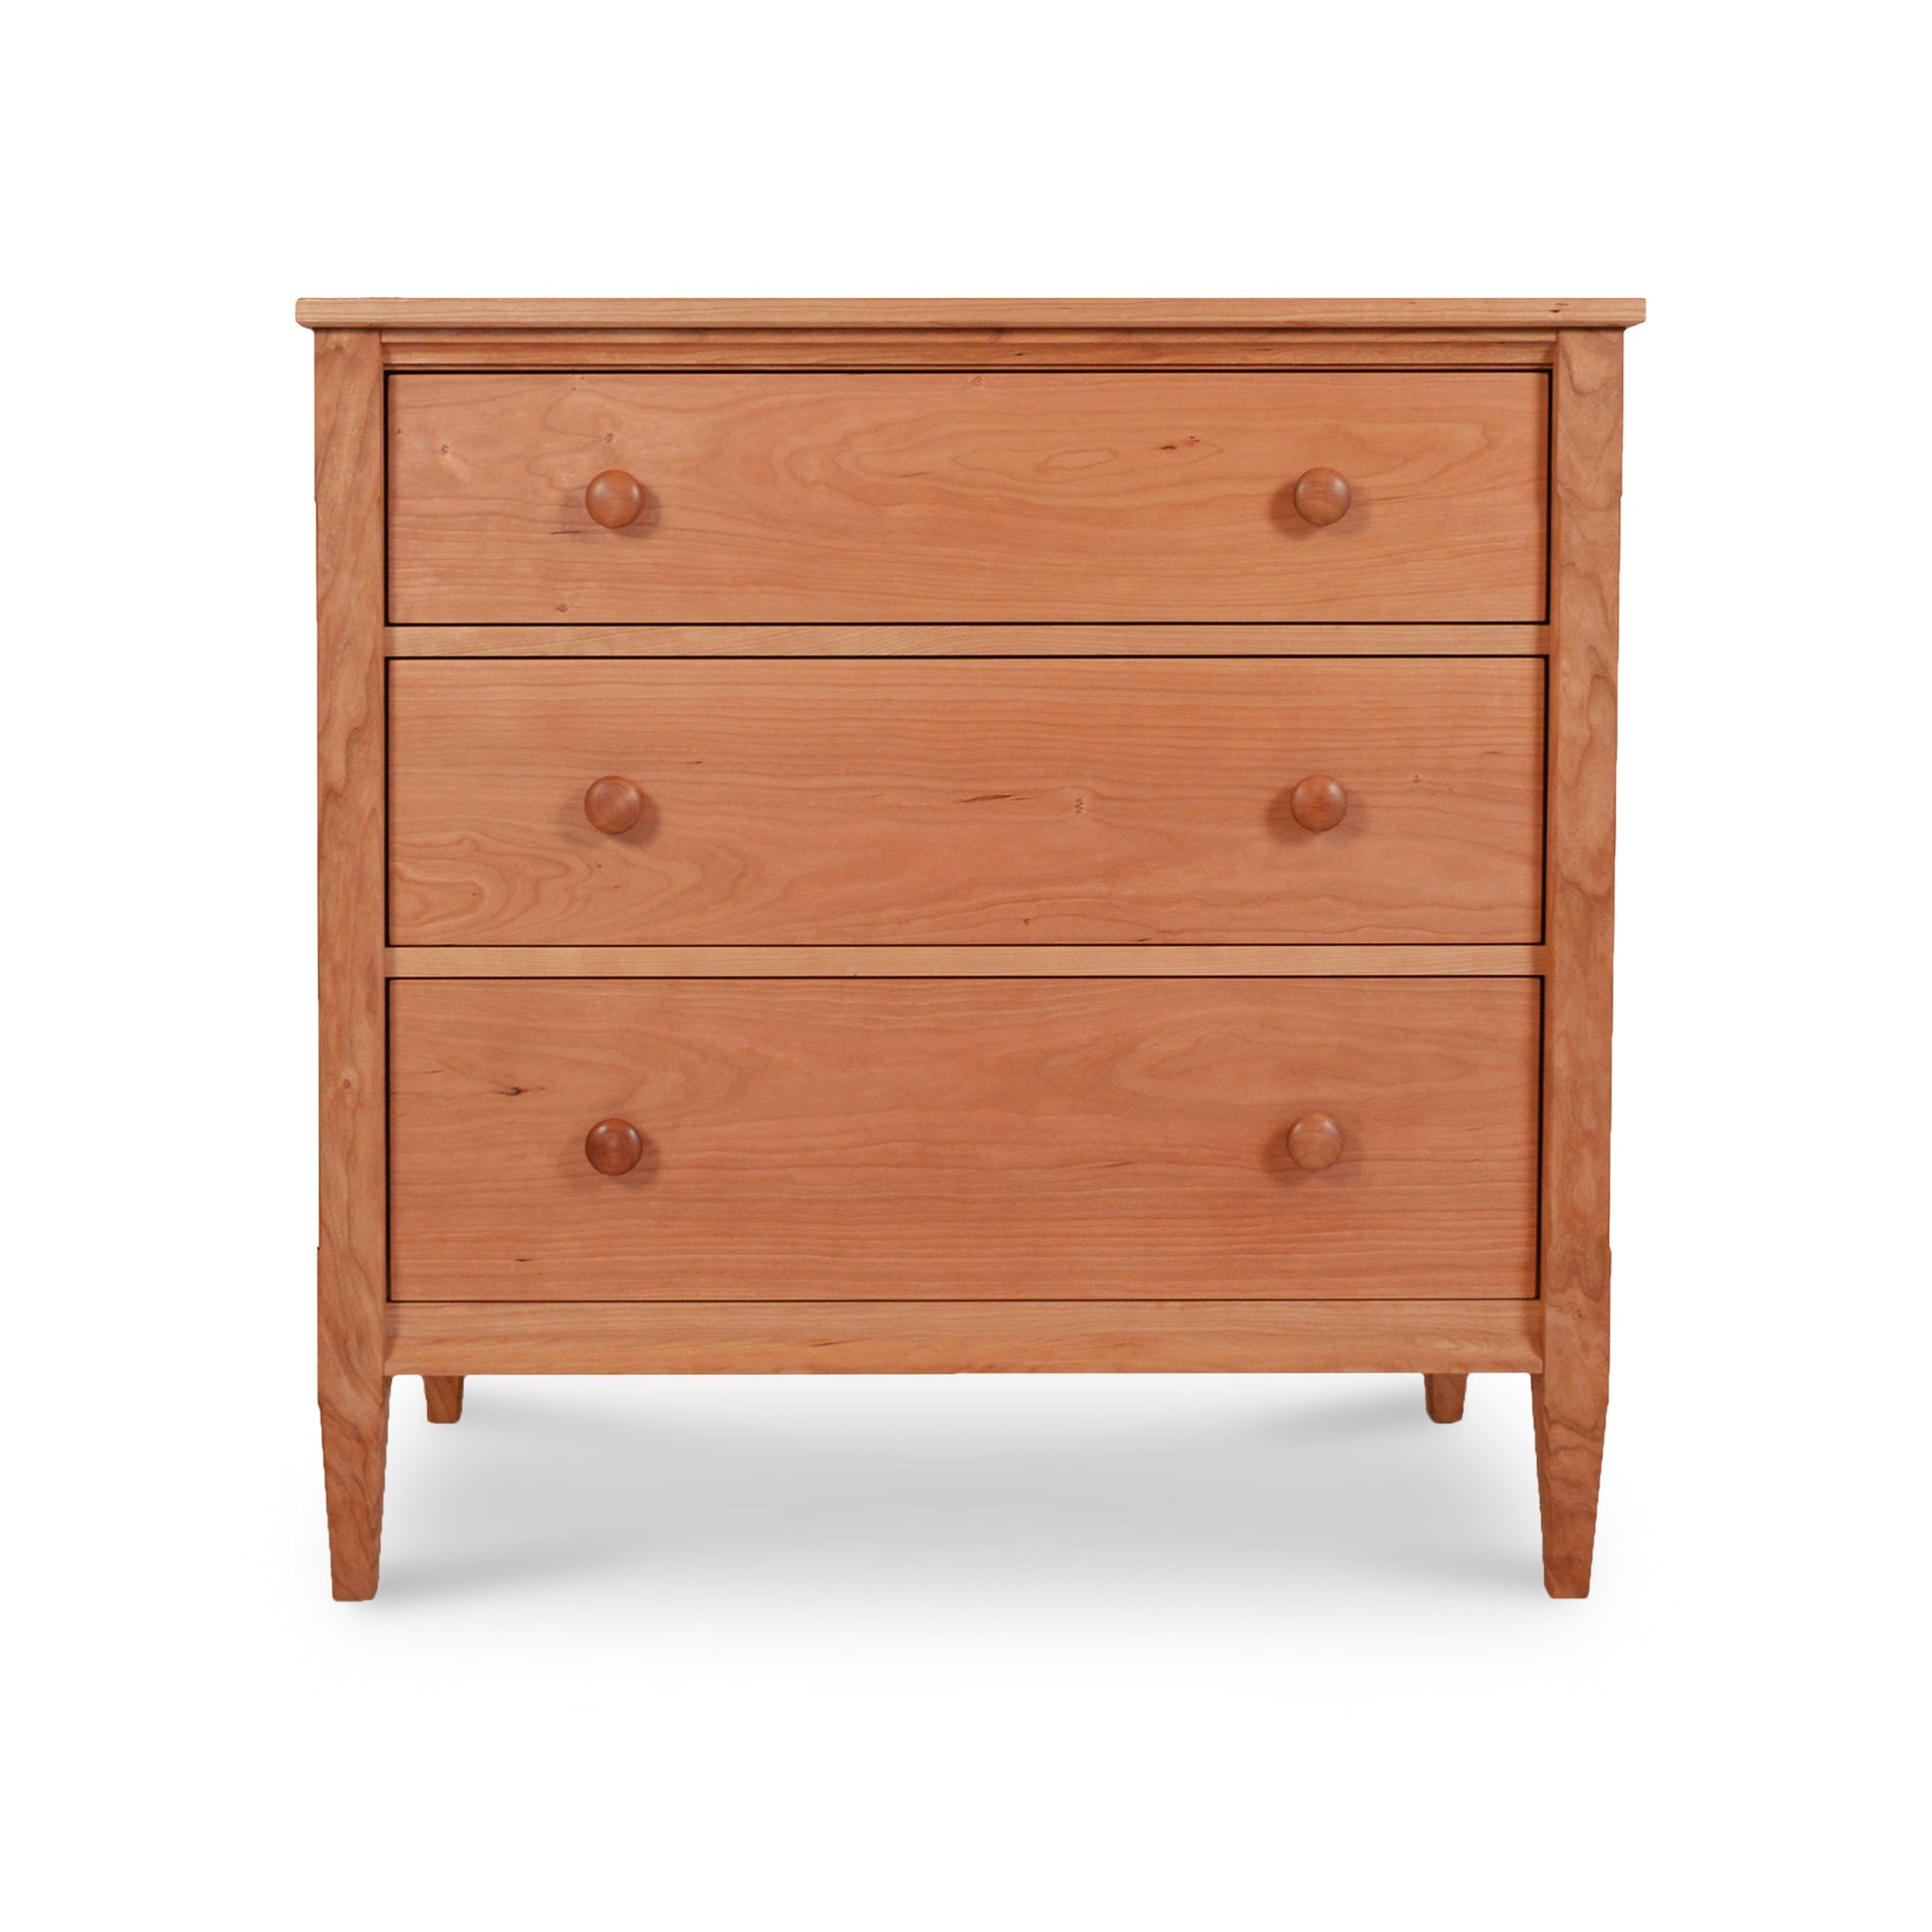 A Maple Corner Woodworks Vermont Shaker 3-Drawer Chest with three parallel drawers, each featuring a rounded knob. The furniture stands on four legs and is set against a white background.